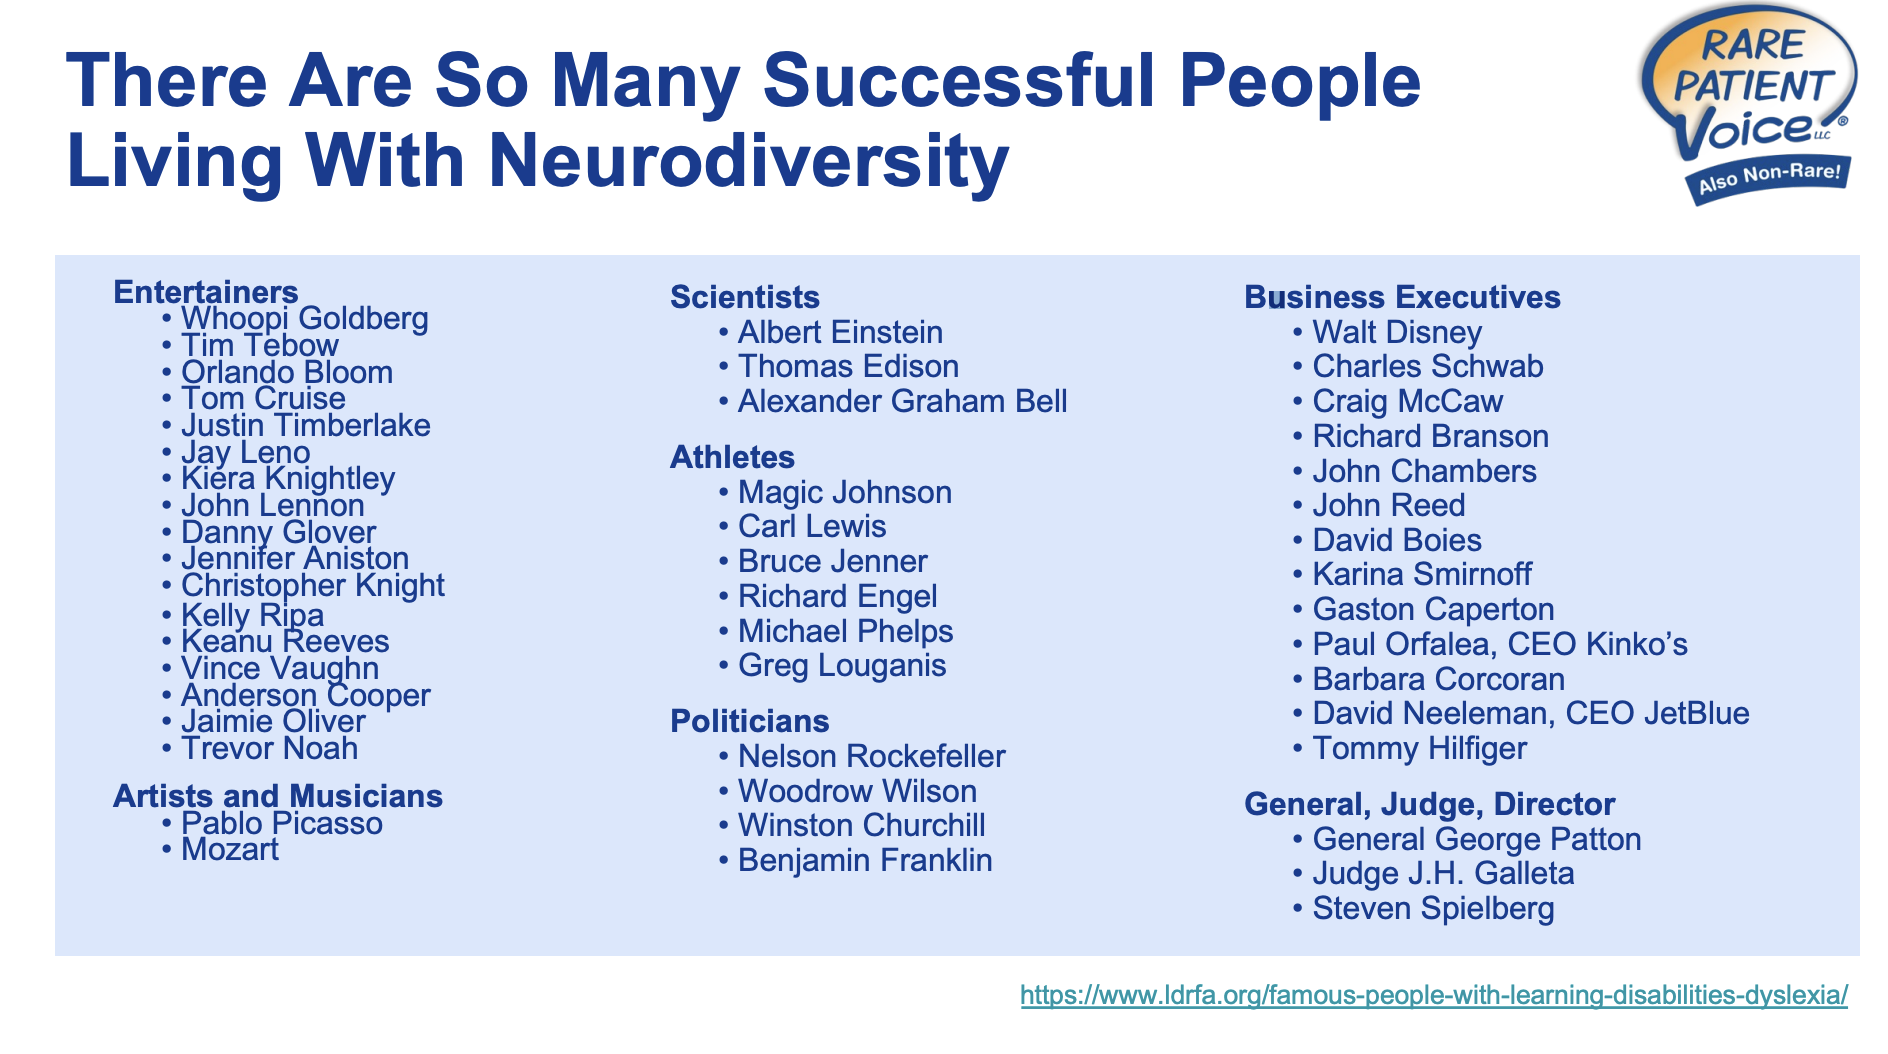 List of successful individuals living with neurodiversity